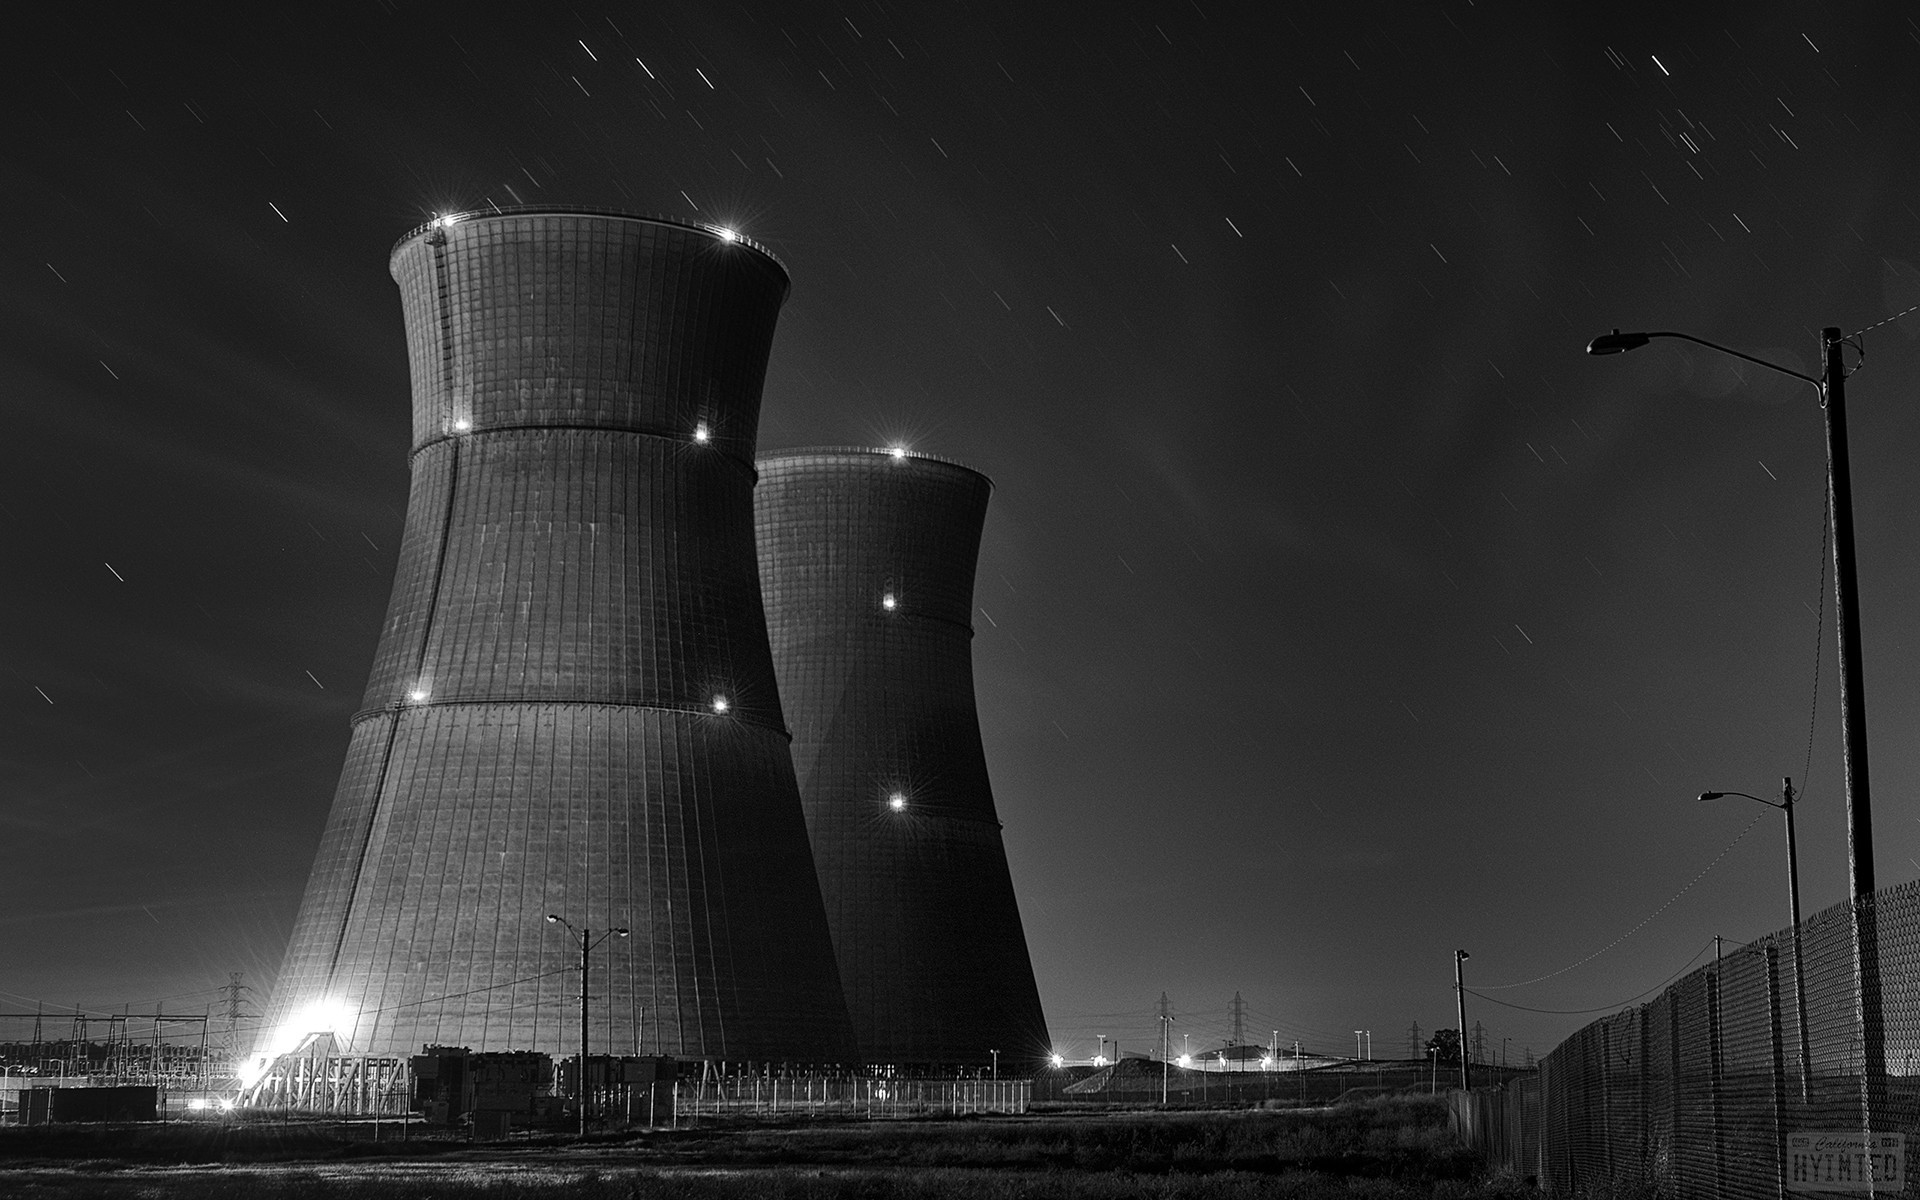 Fires of nuclear power wallpapers and images - wallpapers ...